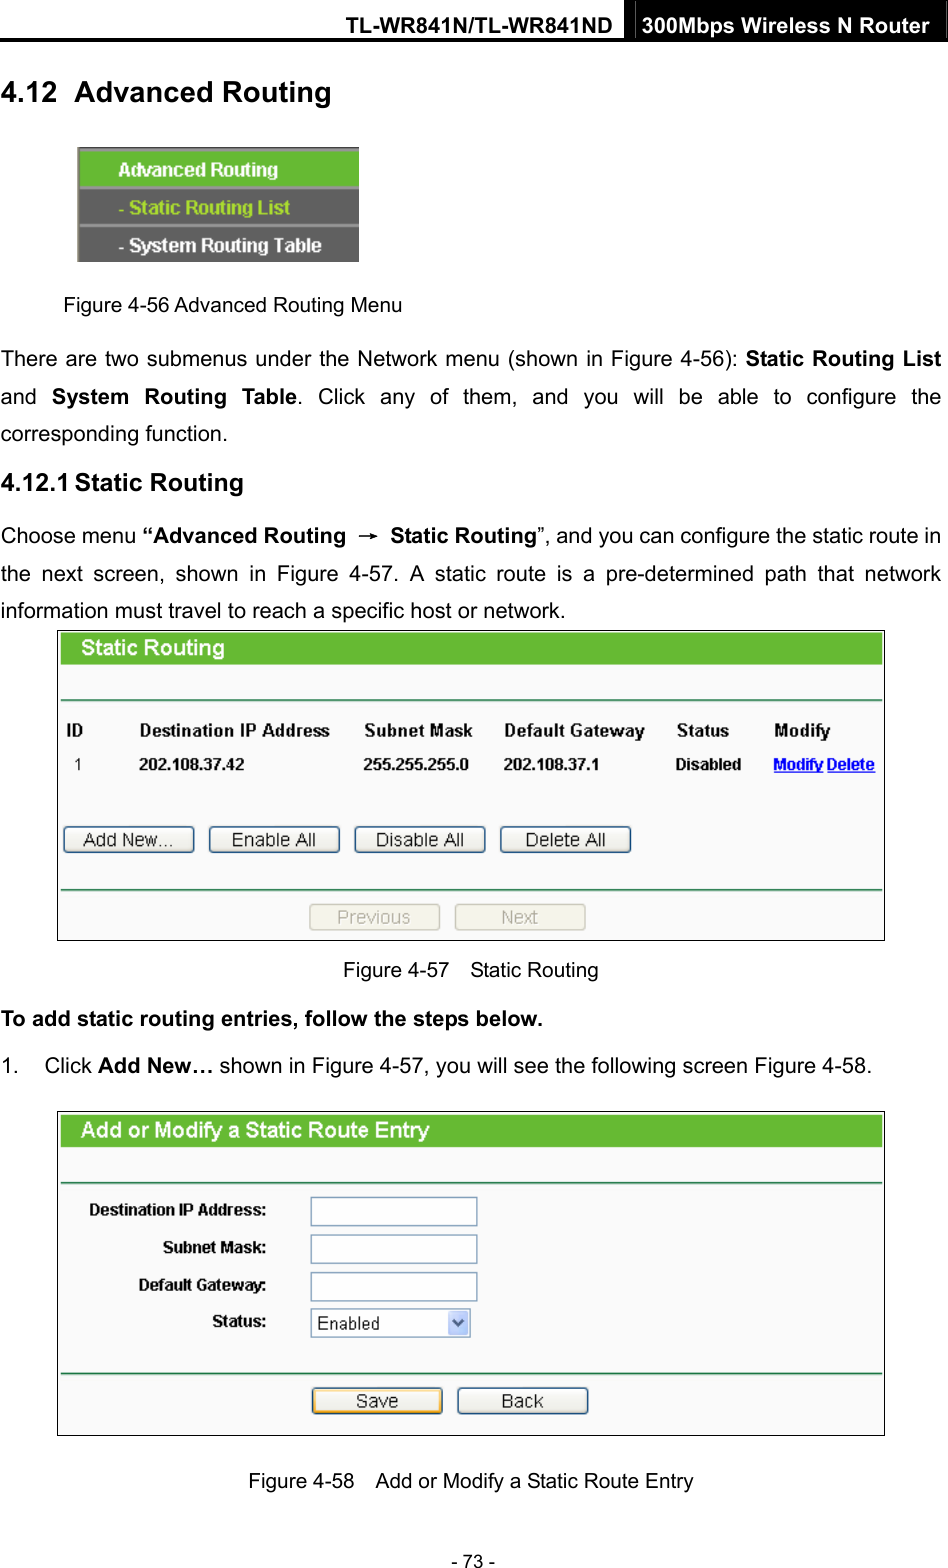 TL-WR841N/TL-WR841ND 300Mbps Wireless N Router - 73 - 4.12   Advanced Routing  Figure 4-56 Advanced Routing Menu There are two submenus under the Network menu (shown in Figure 4-56): Static Routing List and  System Routing Table. Click any of them, and you will be able to configure the corresponding function. 4.12.1 Static Routing Choose menu “Advanced Routing  → Static Routing”, and you can configure the static route in the next screen, shown in Figure 4-57. A static route is a pre-determined path that network information must travel to reach a specific host or network.  Figure 4-57  Static Routing To add static routing entries, follow the steps below. 1. Click Add New… shown in Figure 4-57, you will see the following screen Figure 4-58.   Figure 4-58    Add or Modify a Static Route Entry 